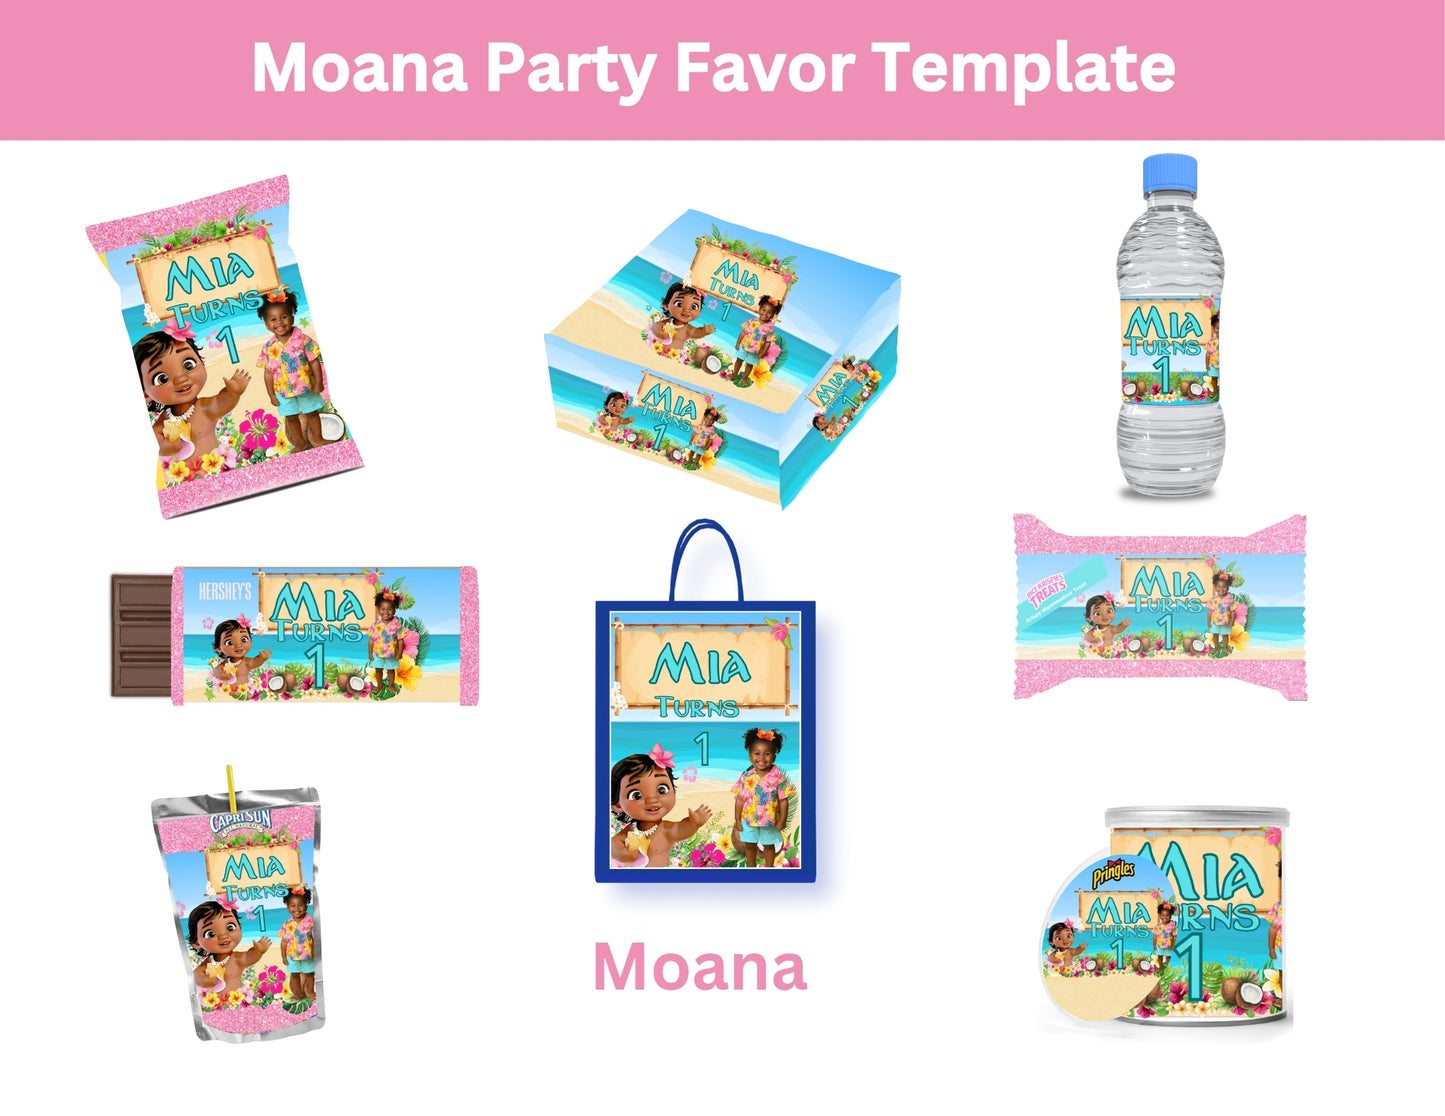 Moana Party Favor Template